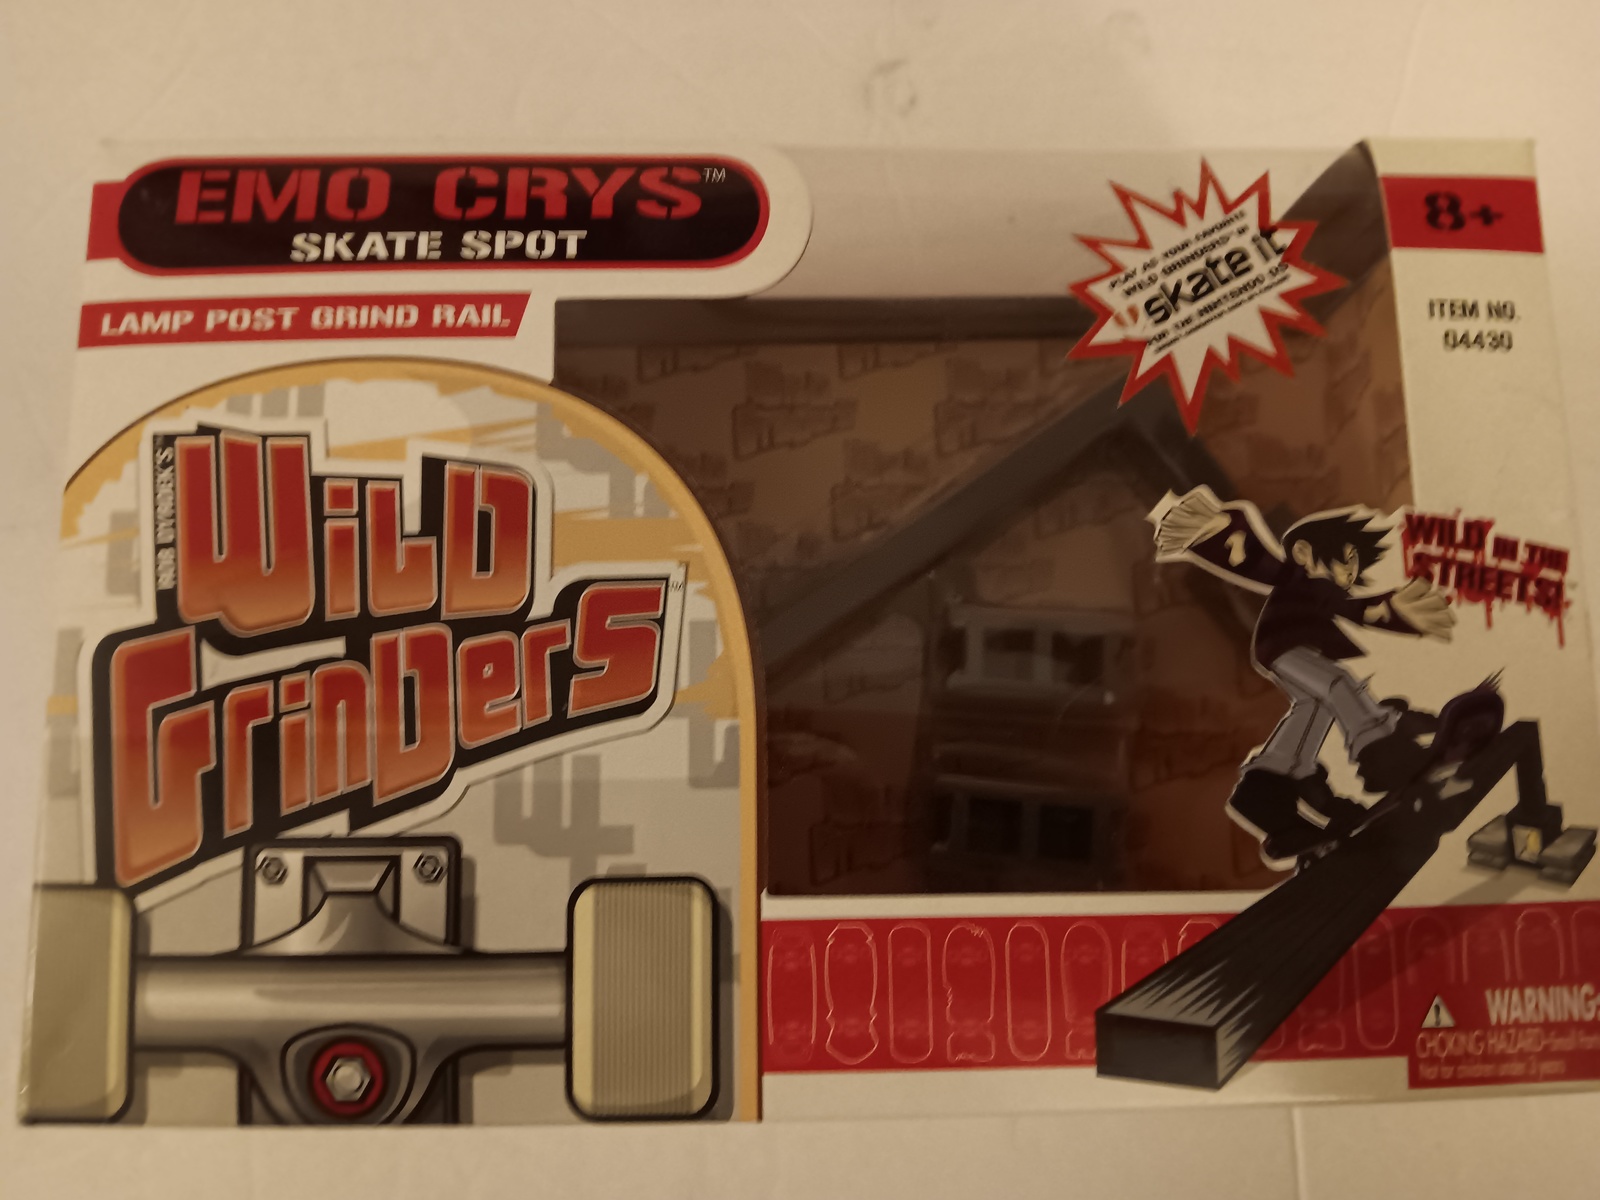 Wild Griders Emo Crys Skate Spot Fingerboard Playset Lamp Post Grind Rail Action Figures Playsets